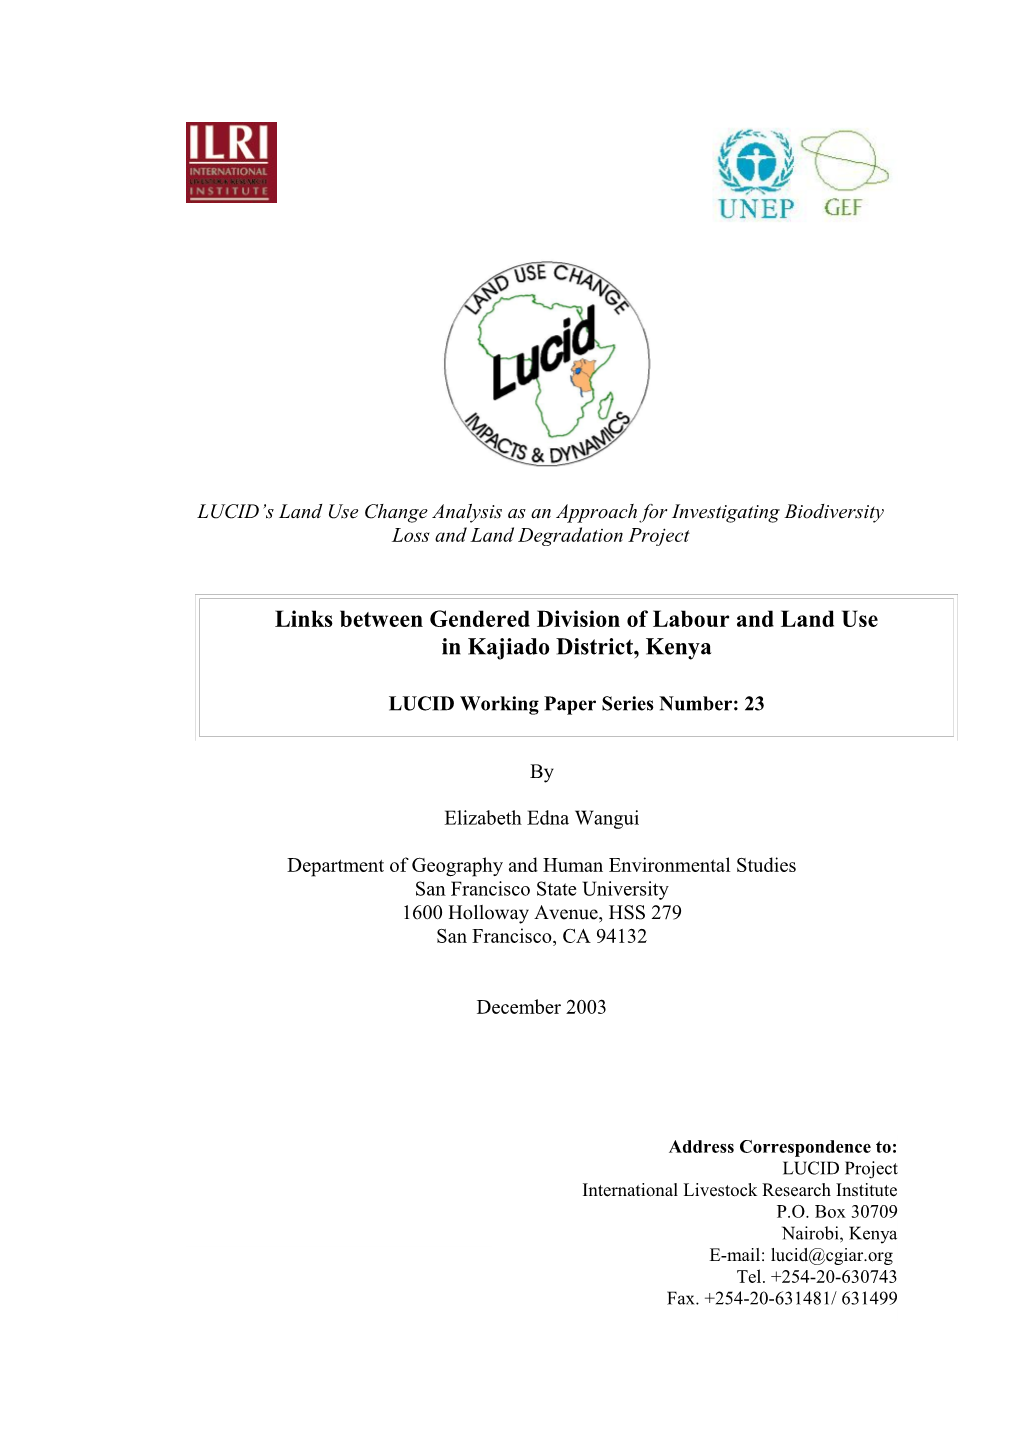 Links Between Gendered Division of Labour and Land Use in Kajiado District, Kenya